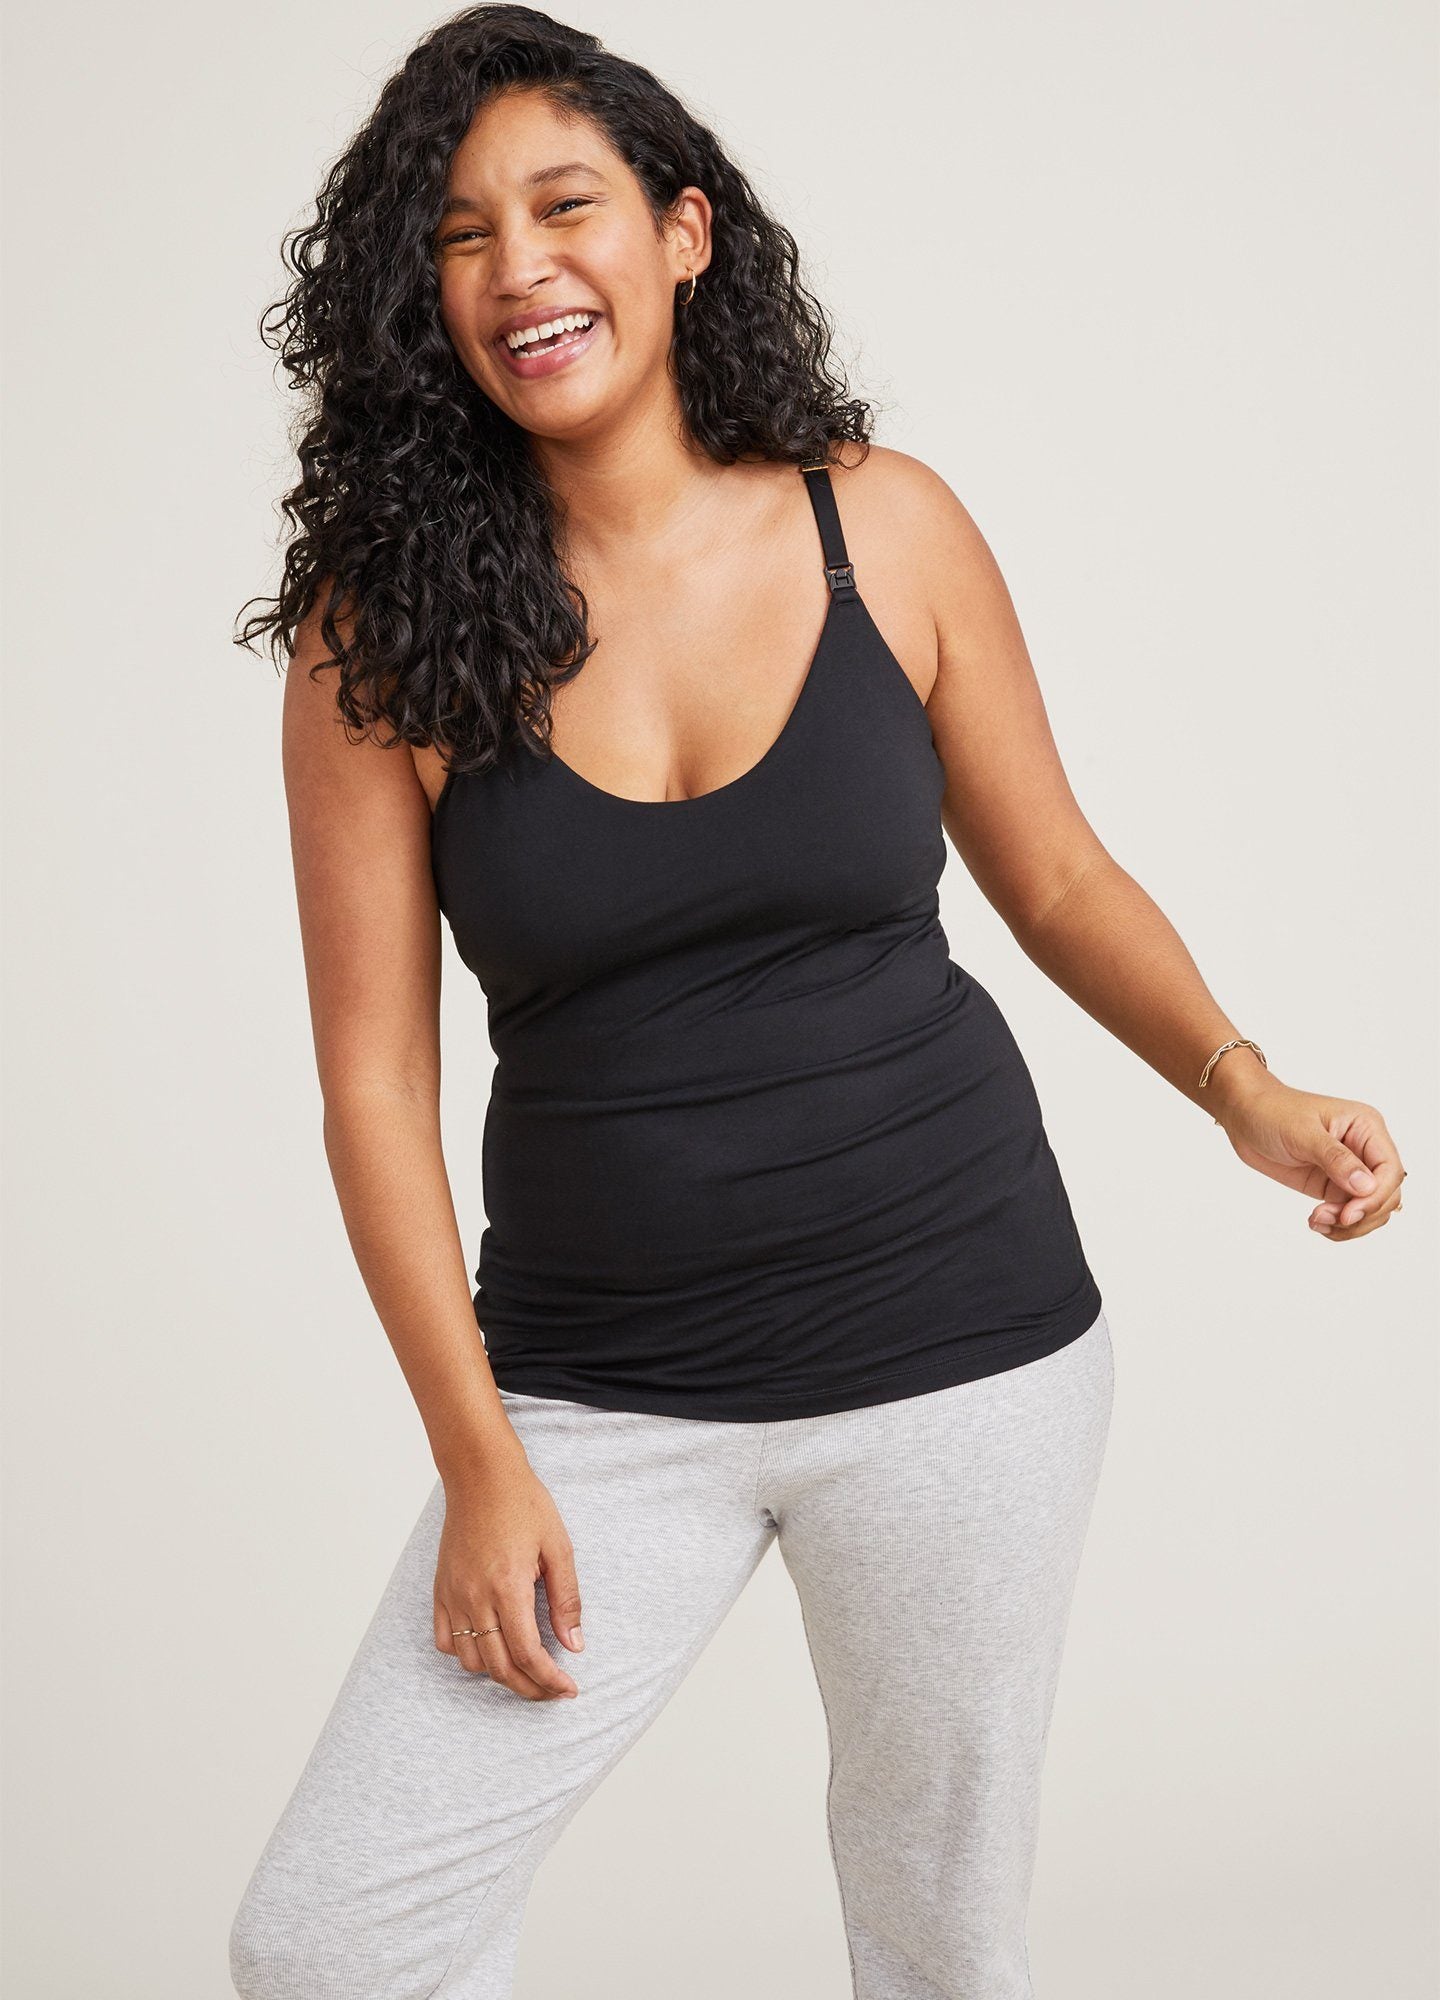 HATCH The Body Tank Maternity Top, Chic Ribbed Maternity Tank Top